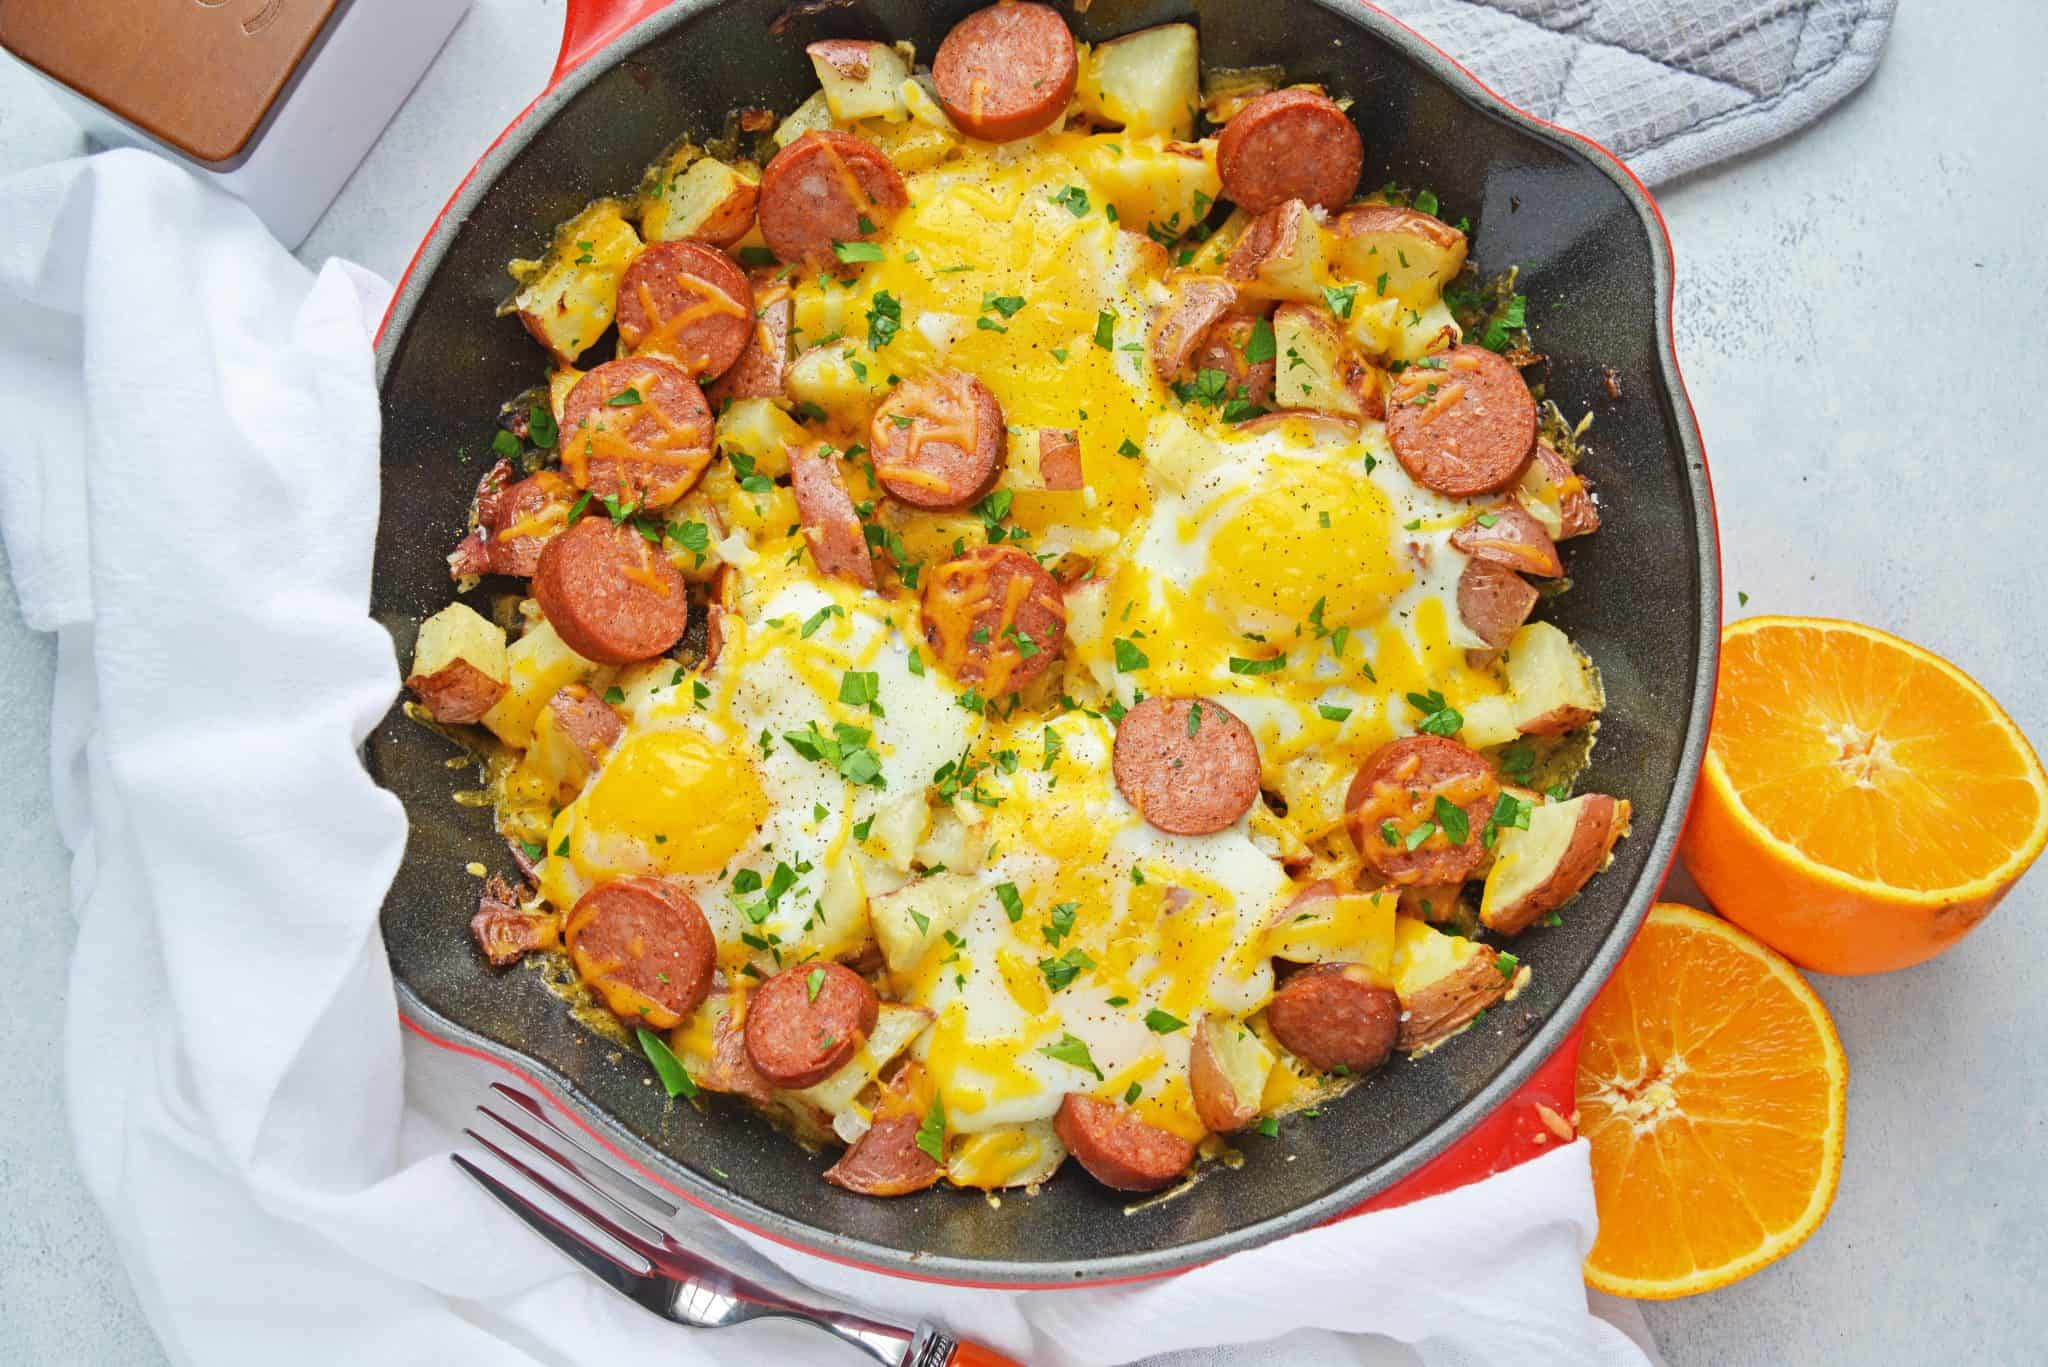 Eggs And Sausage Breakfast Ideas
 Sausage and Egg Skillet A Breakfast Skillet Recipe